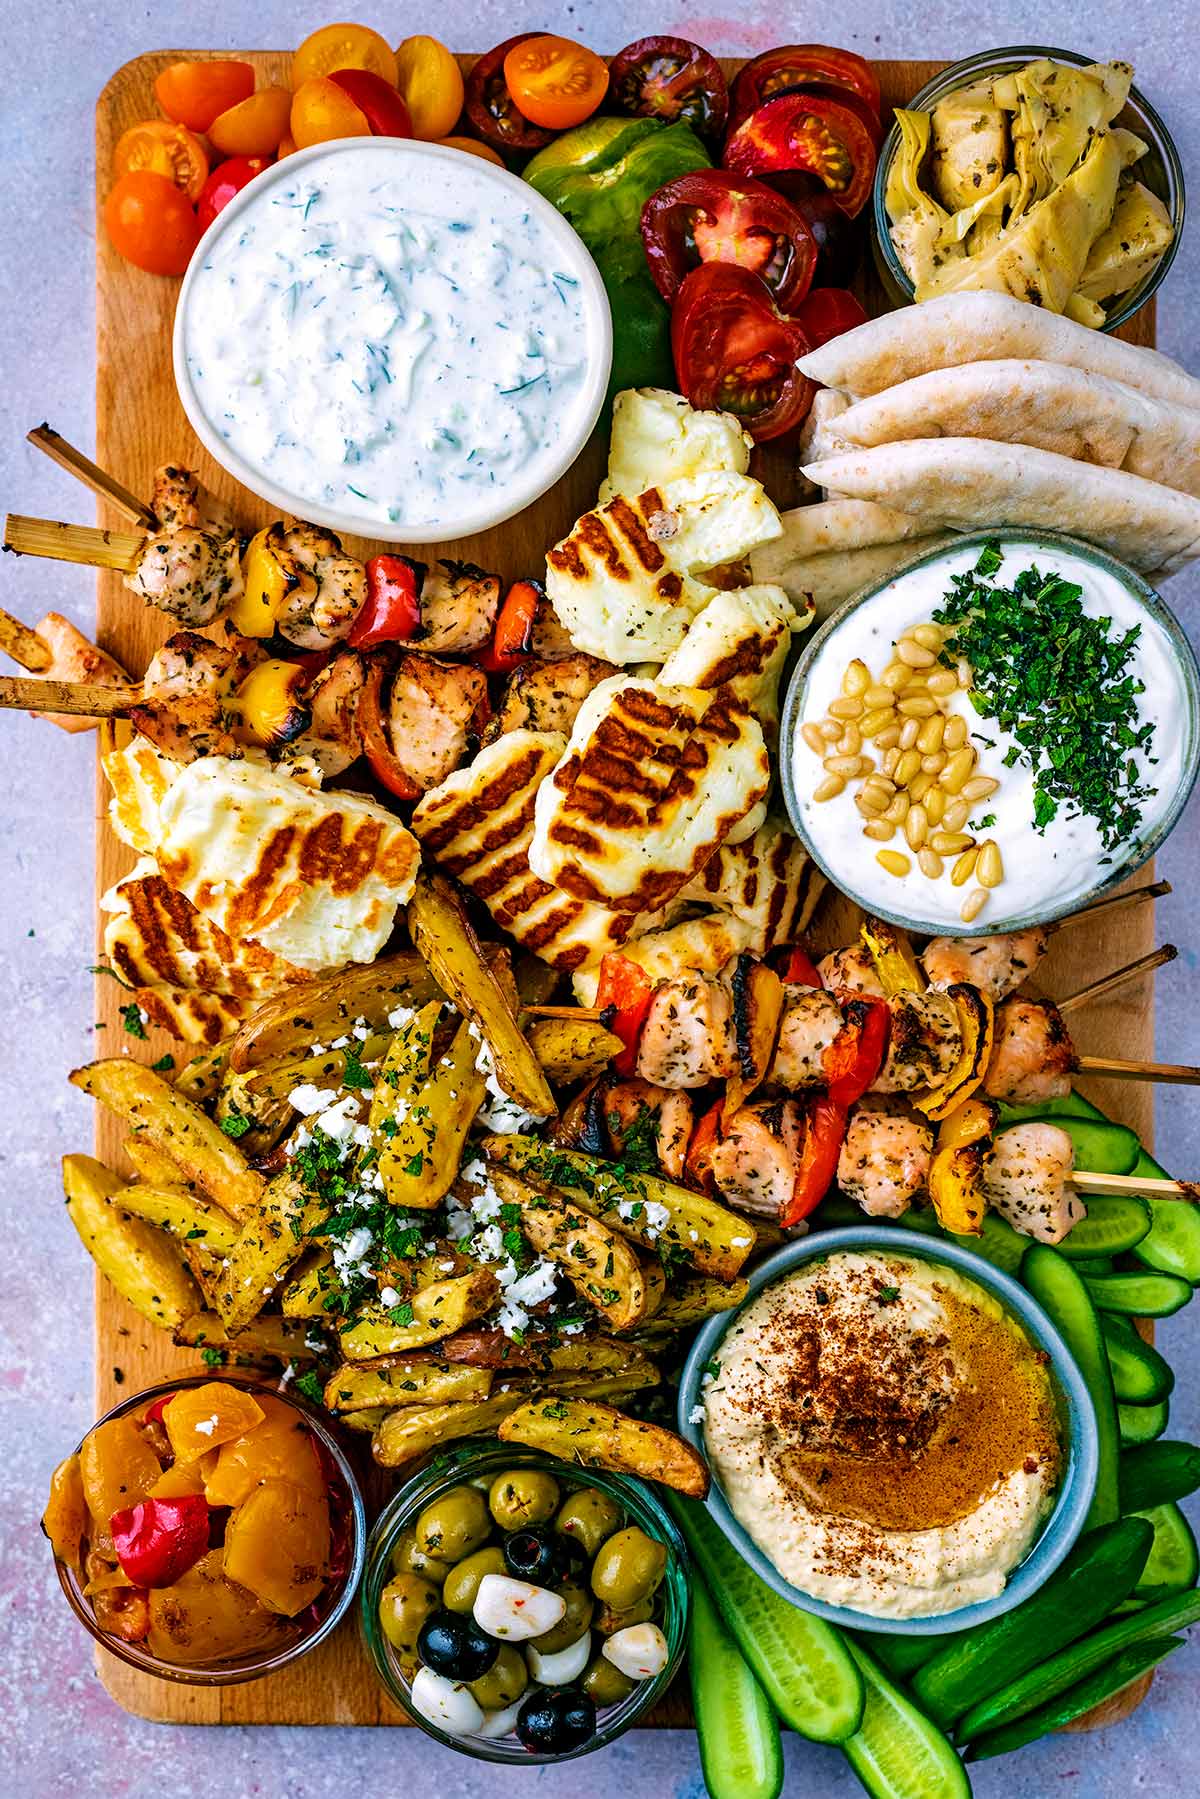 Greek meze platter with hummus, olives, meats and veggies